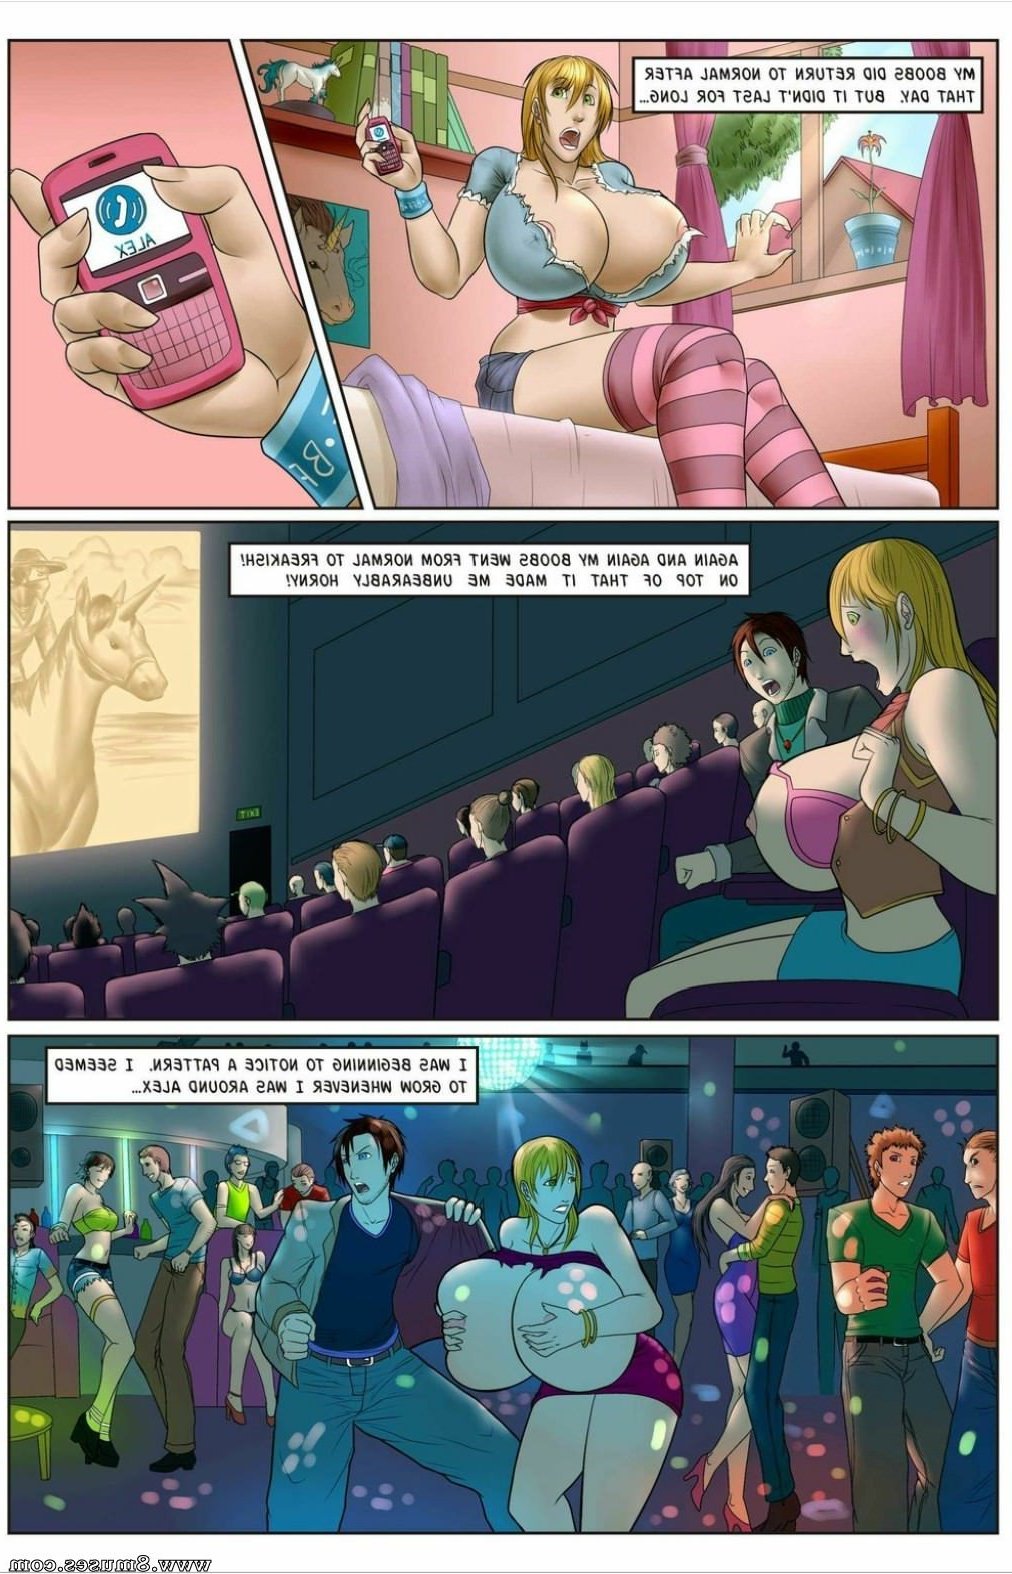 BE-Story-Club-Comics/Breast-Friends/Issue-3 Breast_Friends_-_Issue_3.jpg